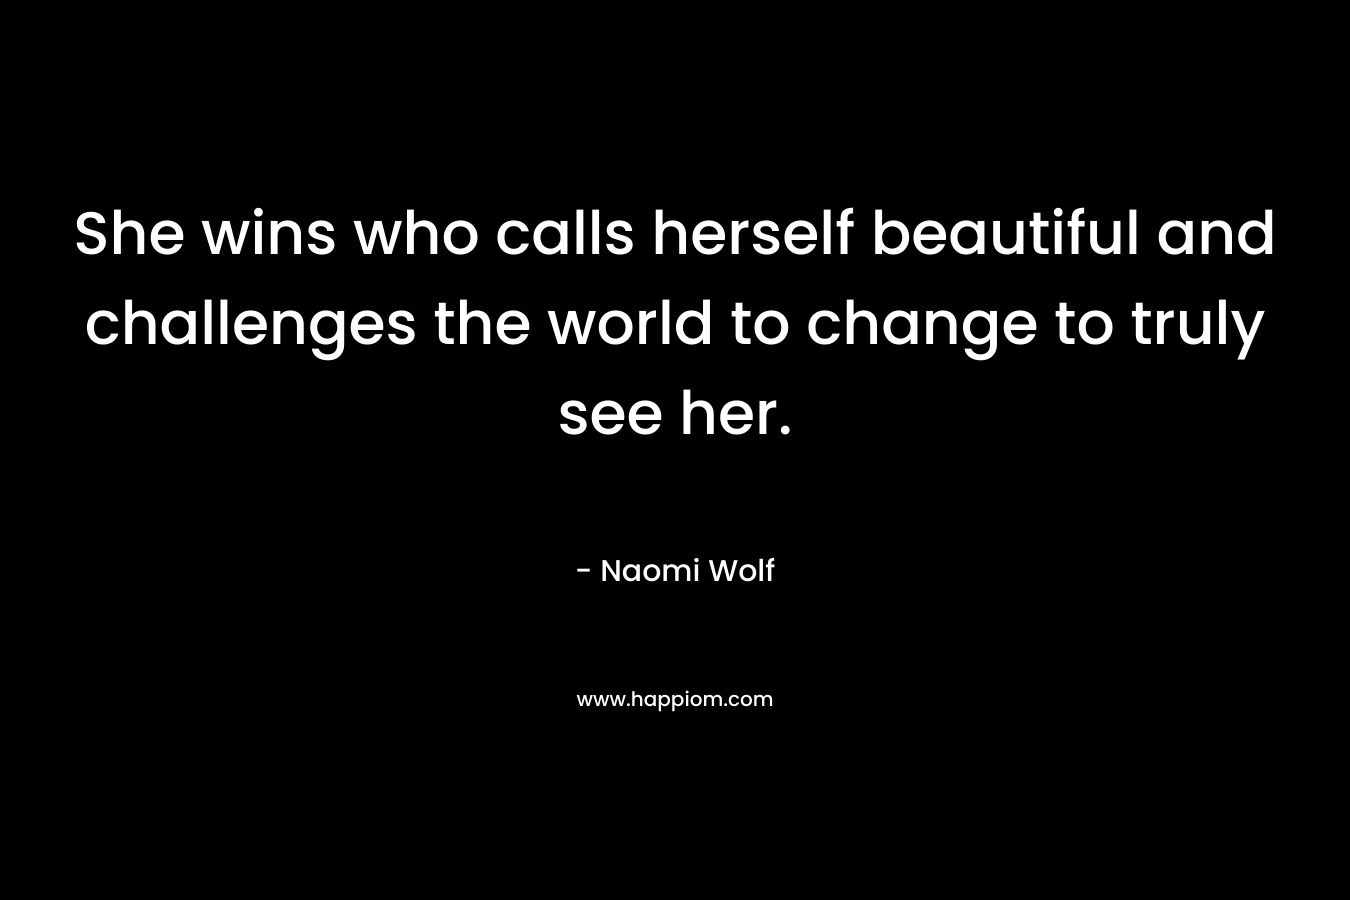 She wins who calls herself beautiful and challenges the world to change to truly see her.